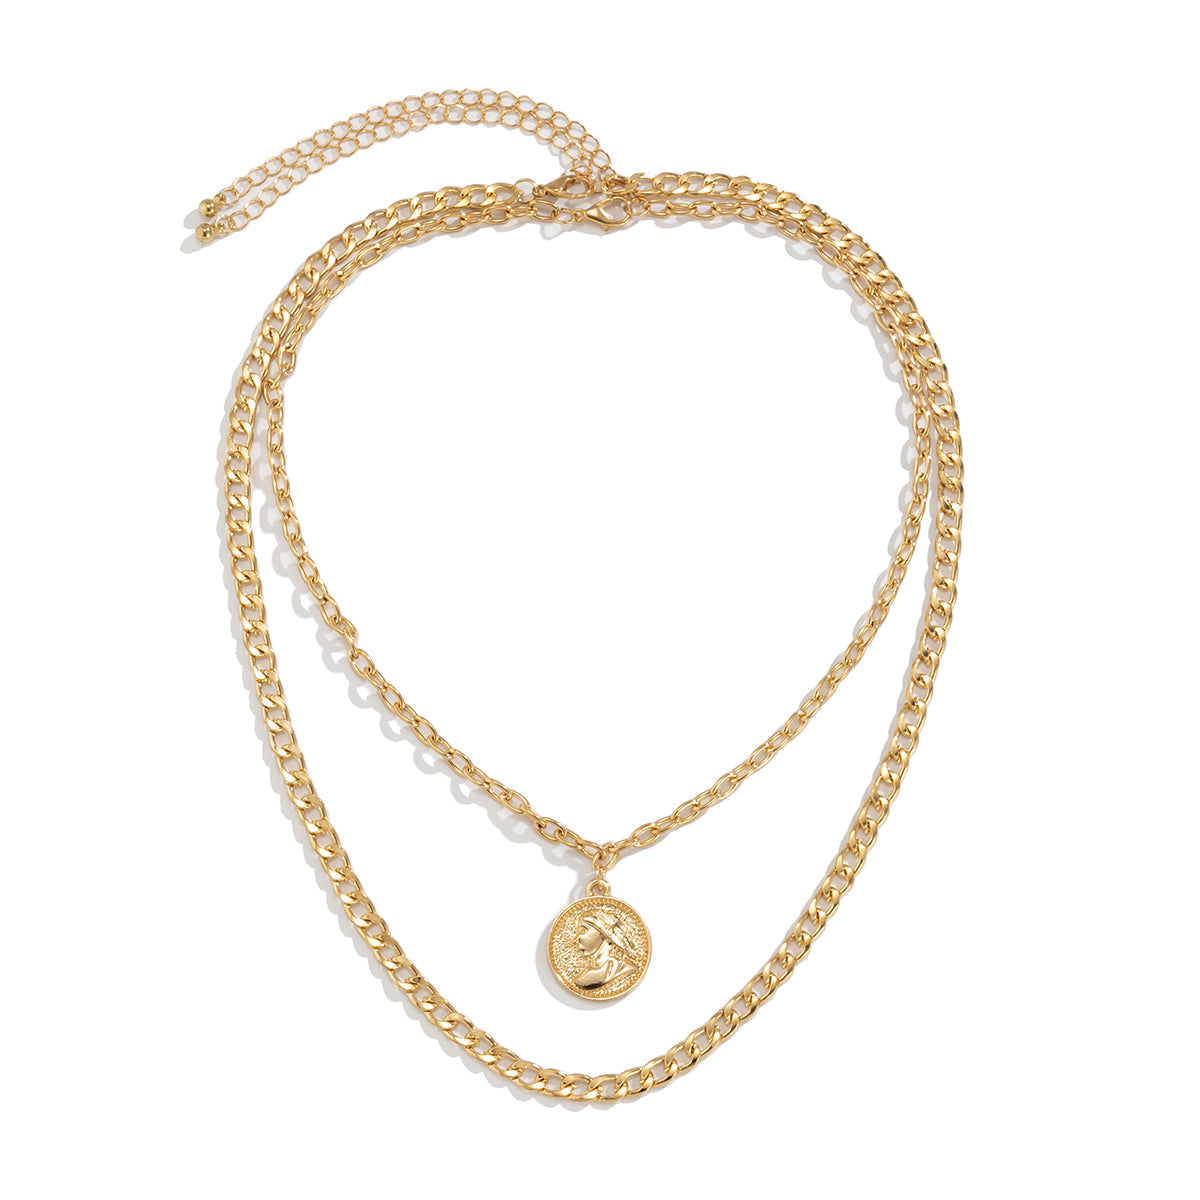 18K Gold-Plated Curb Chain & Coin Pendant Necklace